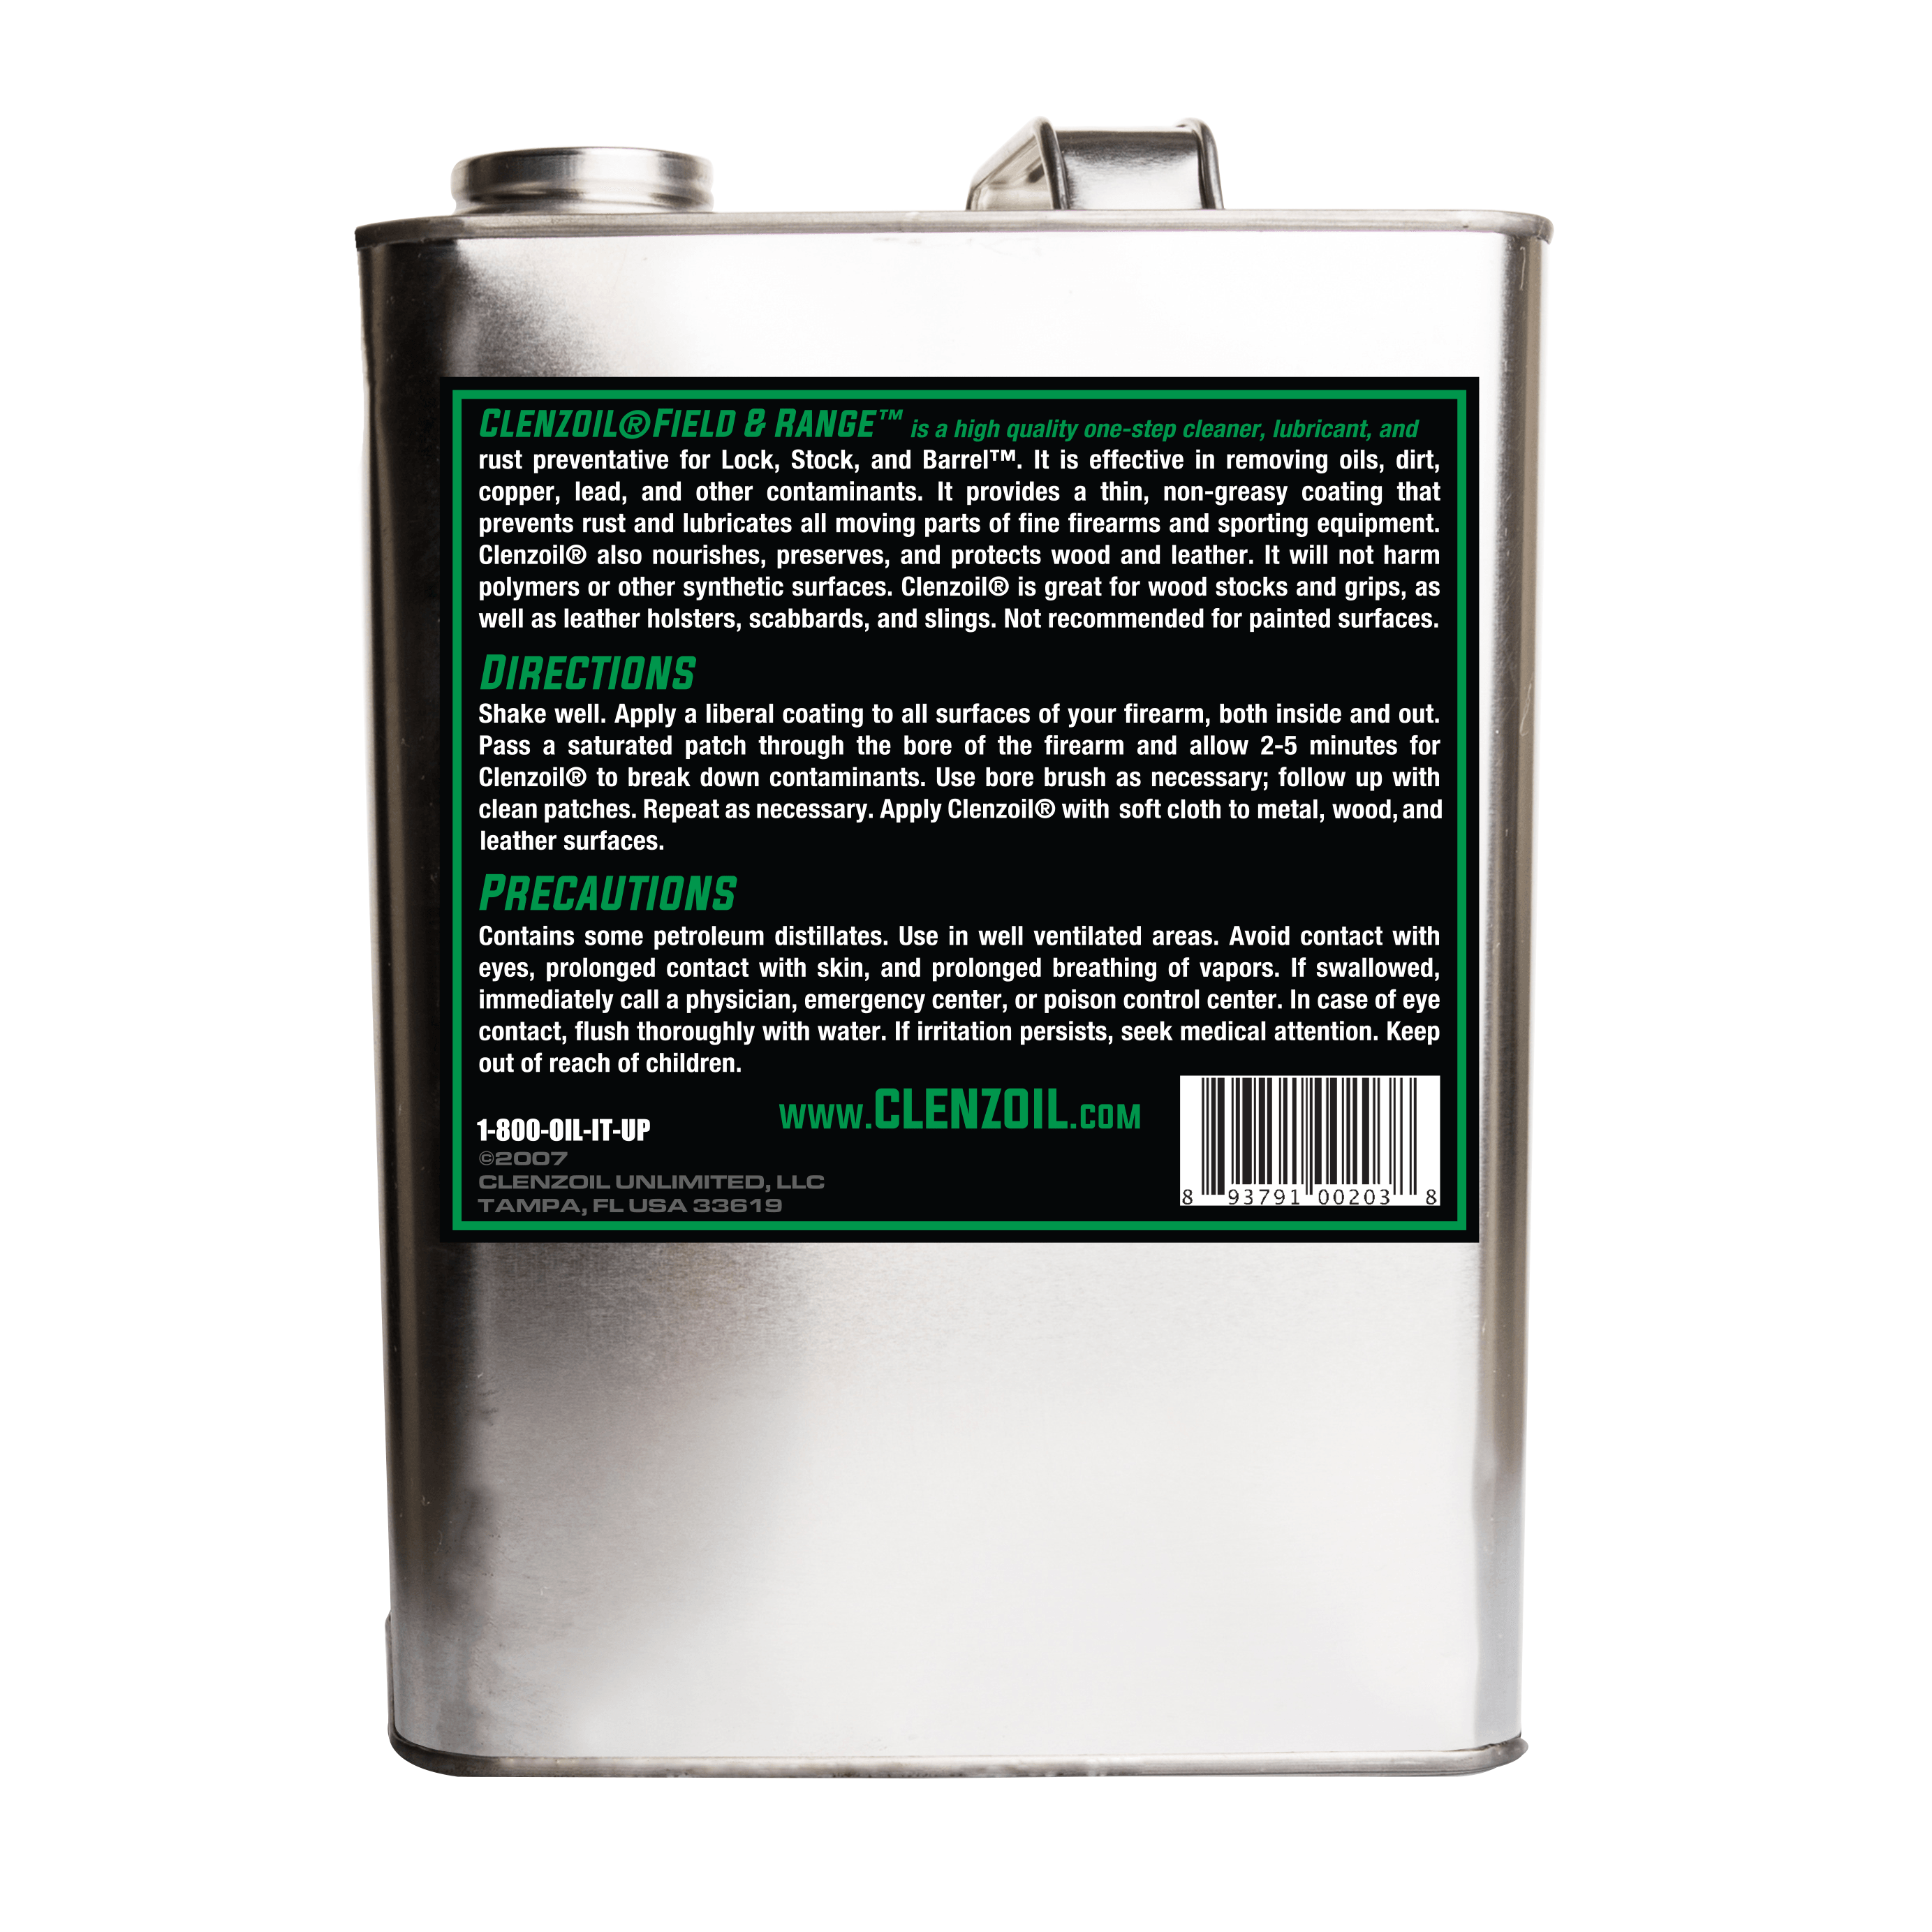 Field & Range Solution (1 Gal.) - Clenzoil Unlimited